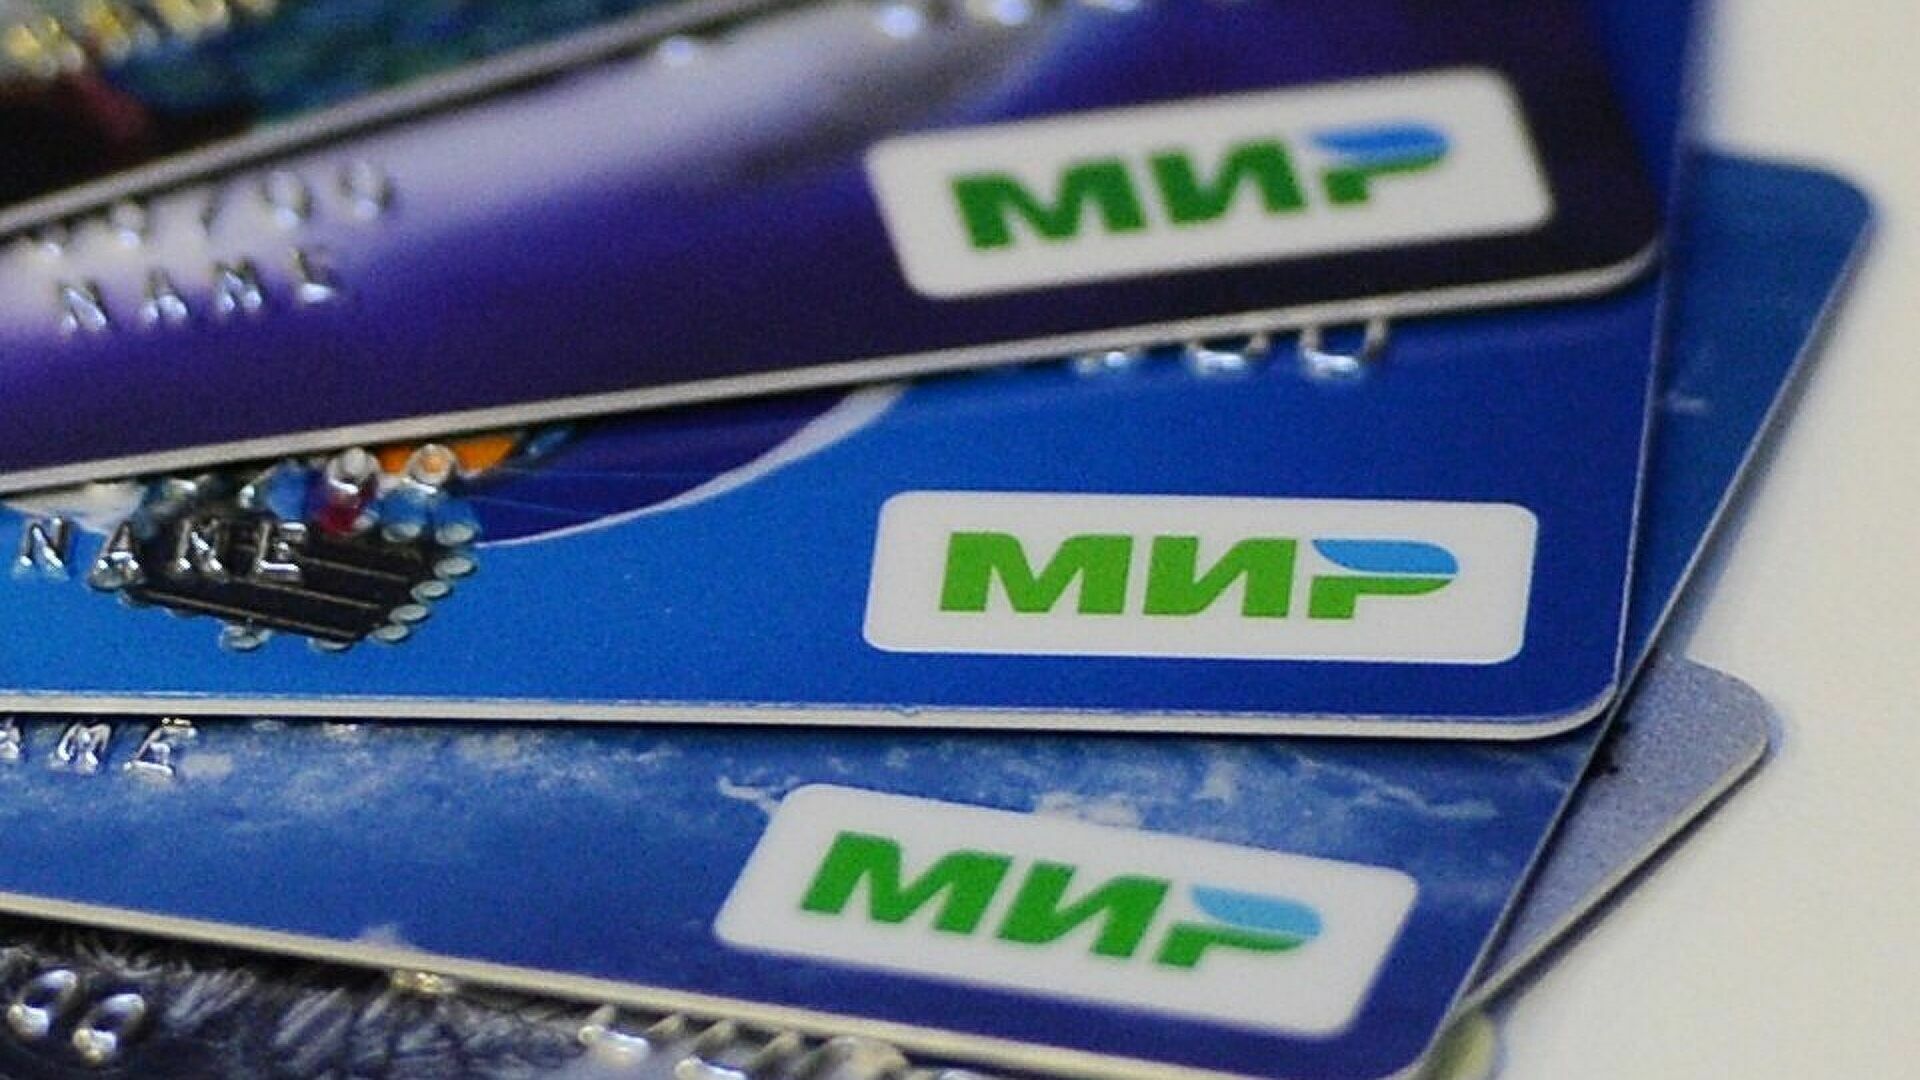 Two more banks in Kyrgyzstan stopped servicing Mir cards